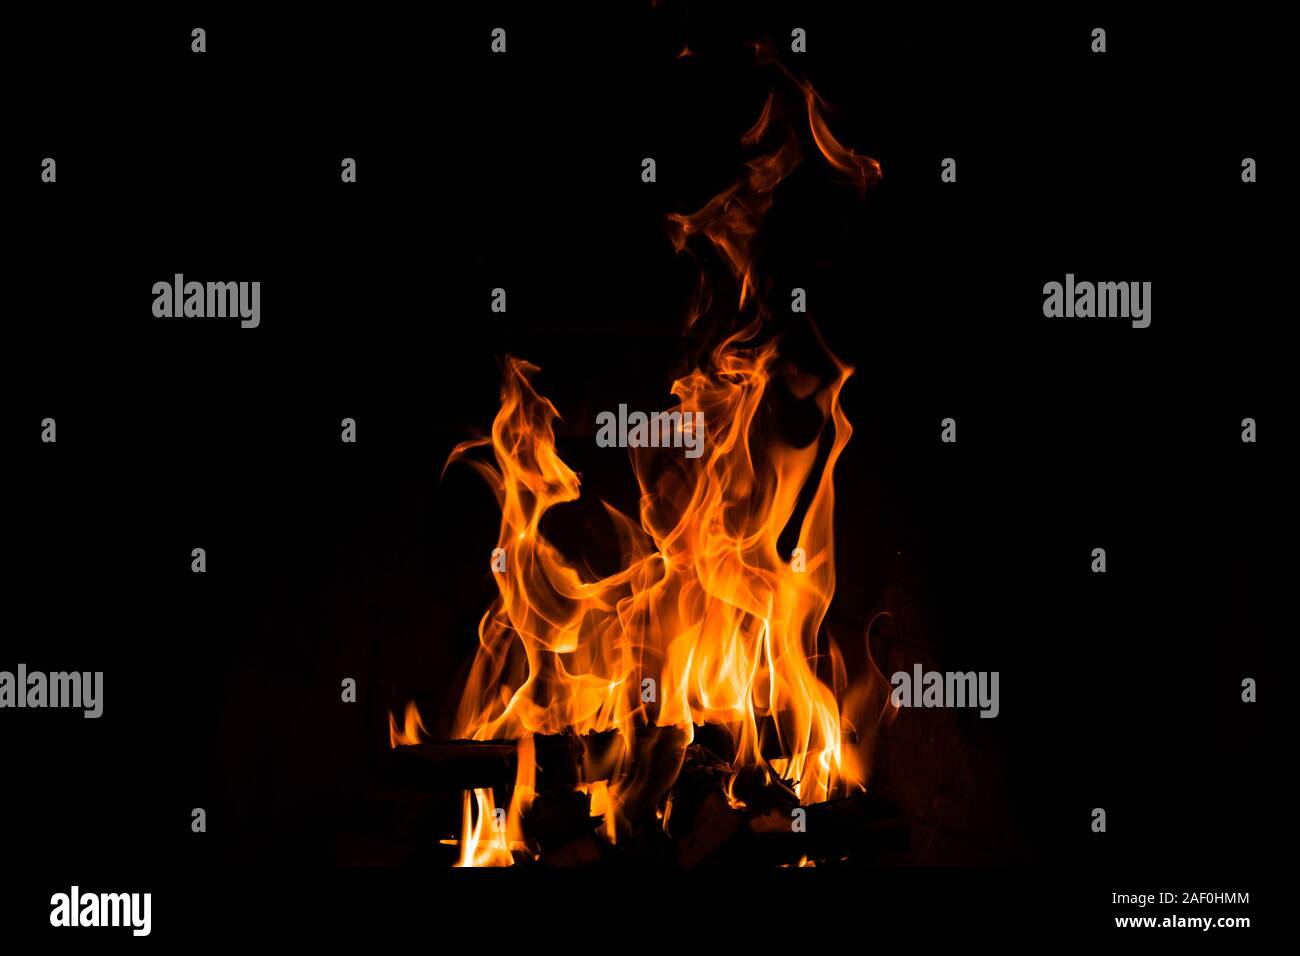 Fire on a black background. fireplace concept. Stock Photo